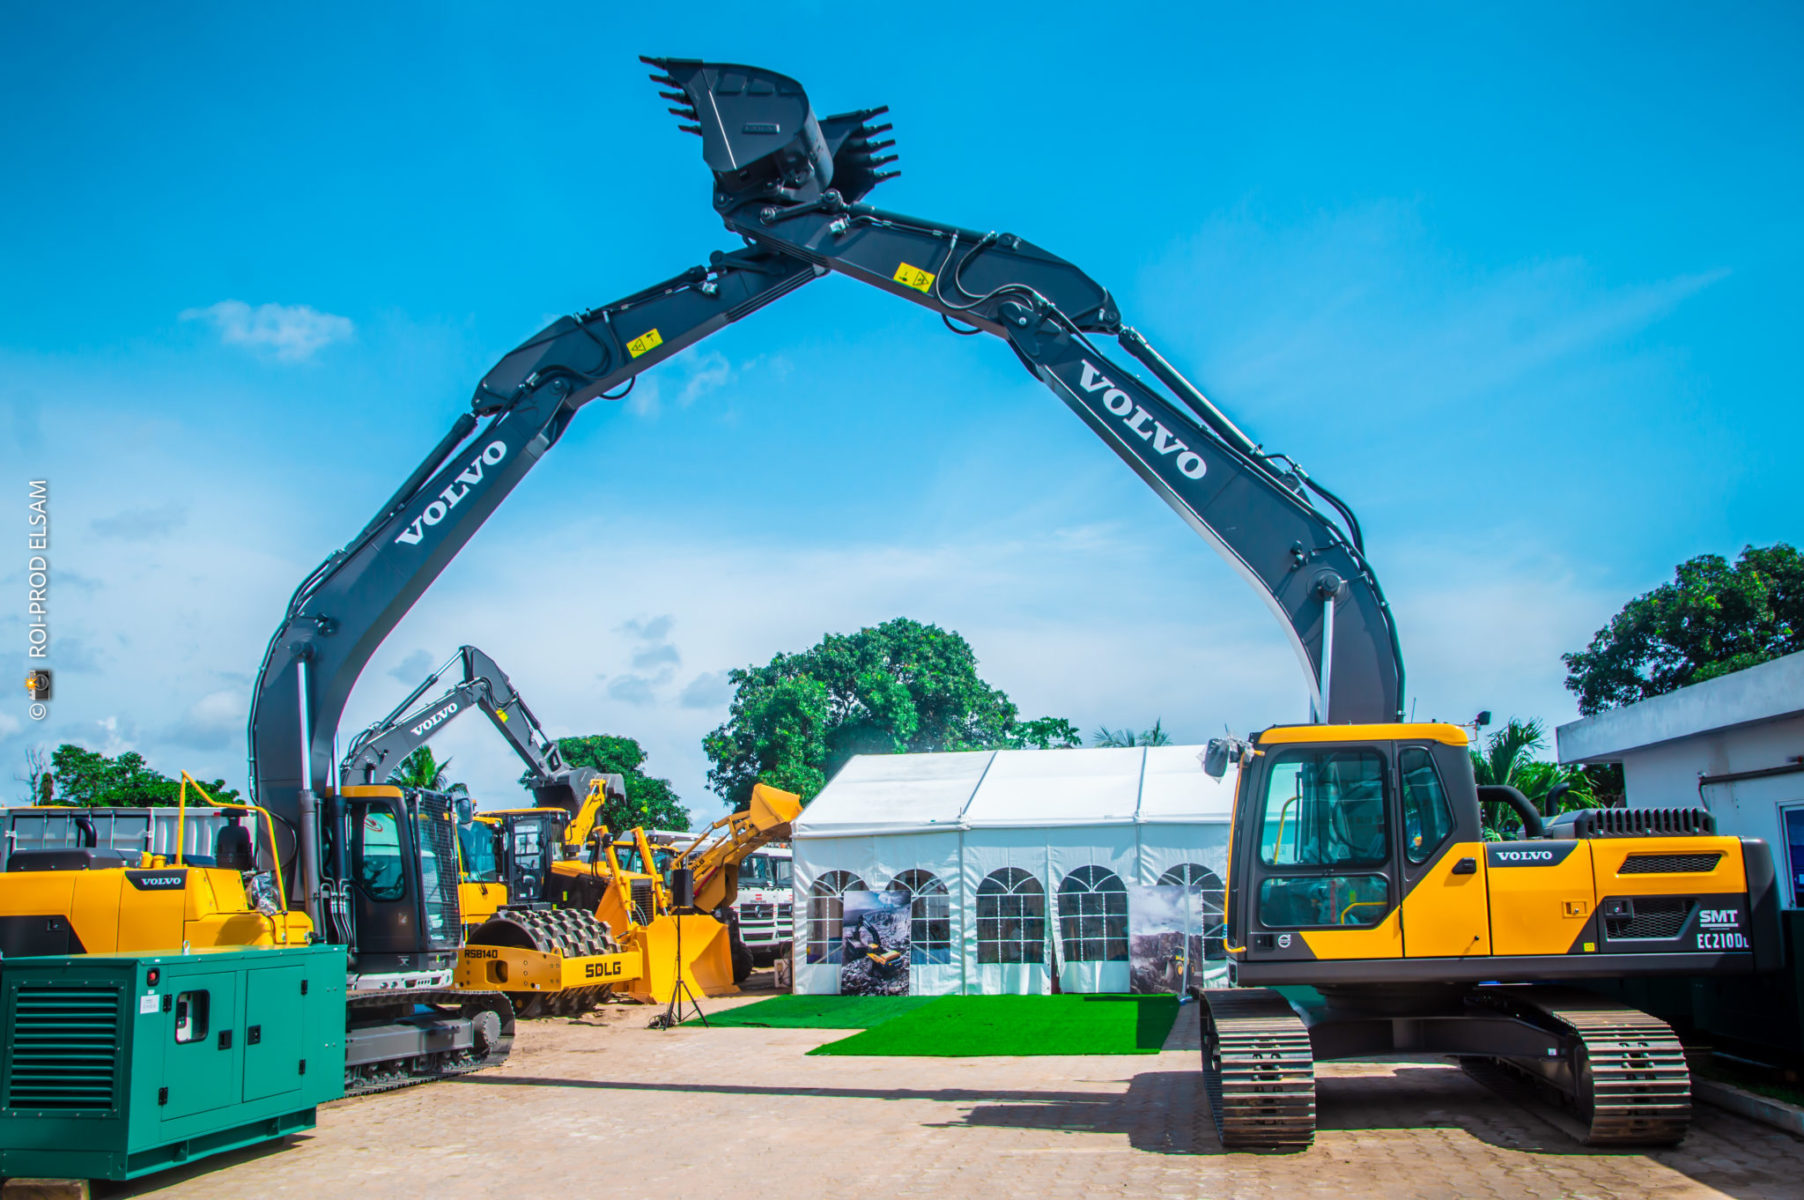  Two Volvo EC210DL crawler excavators were on display at the event in Cotonou